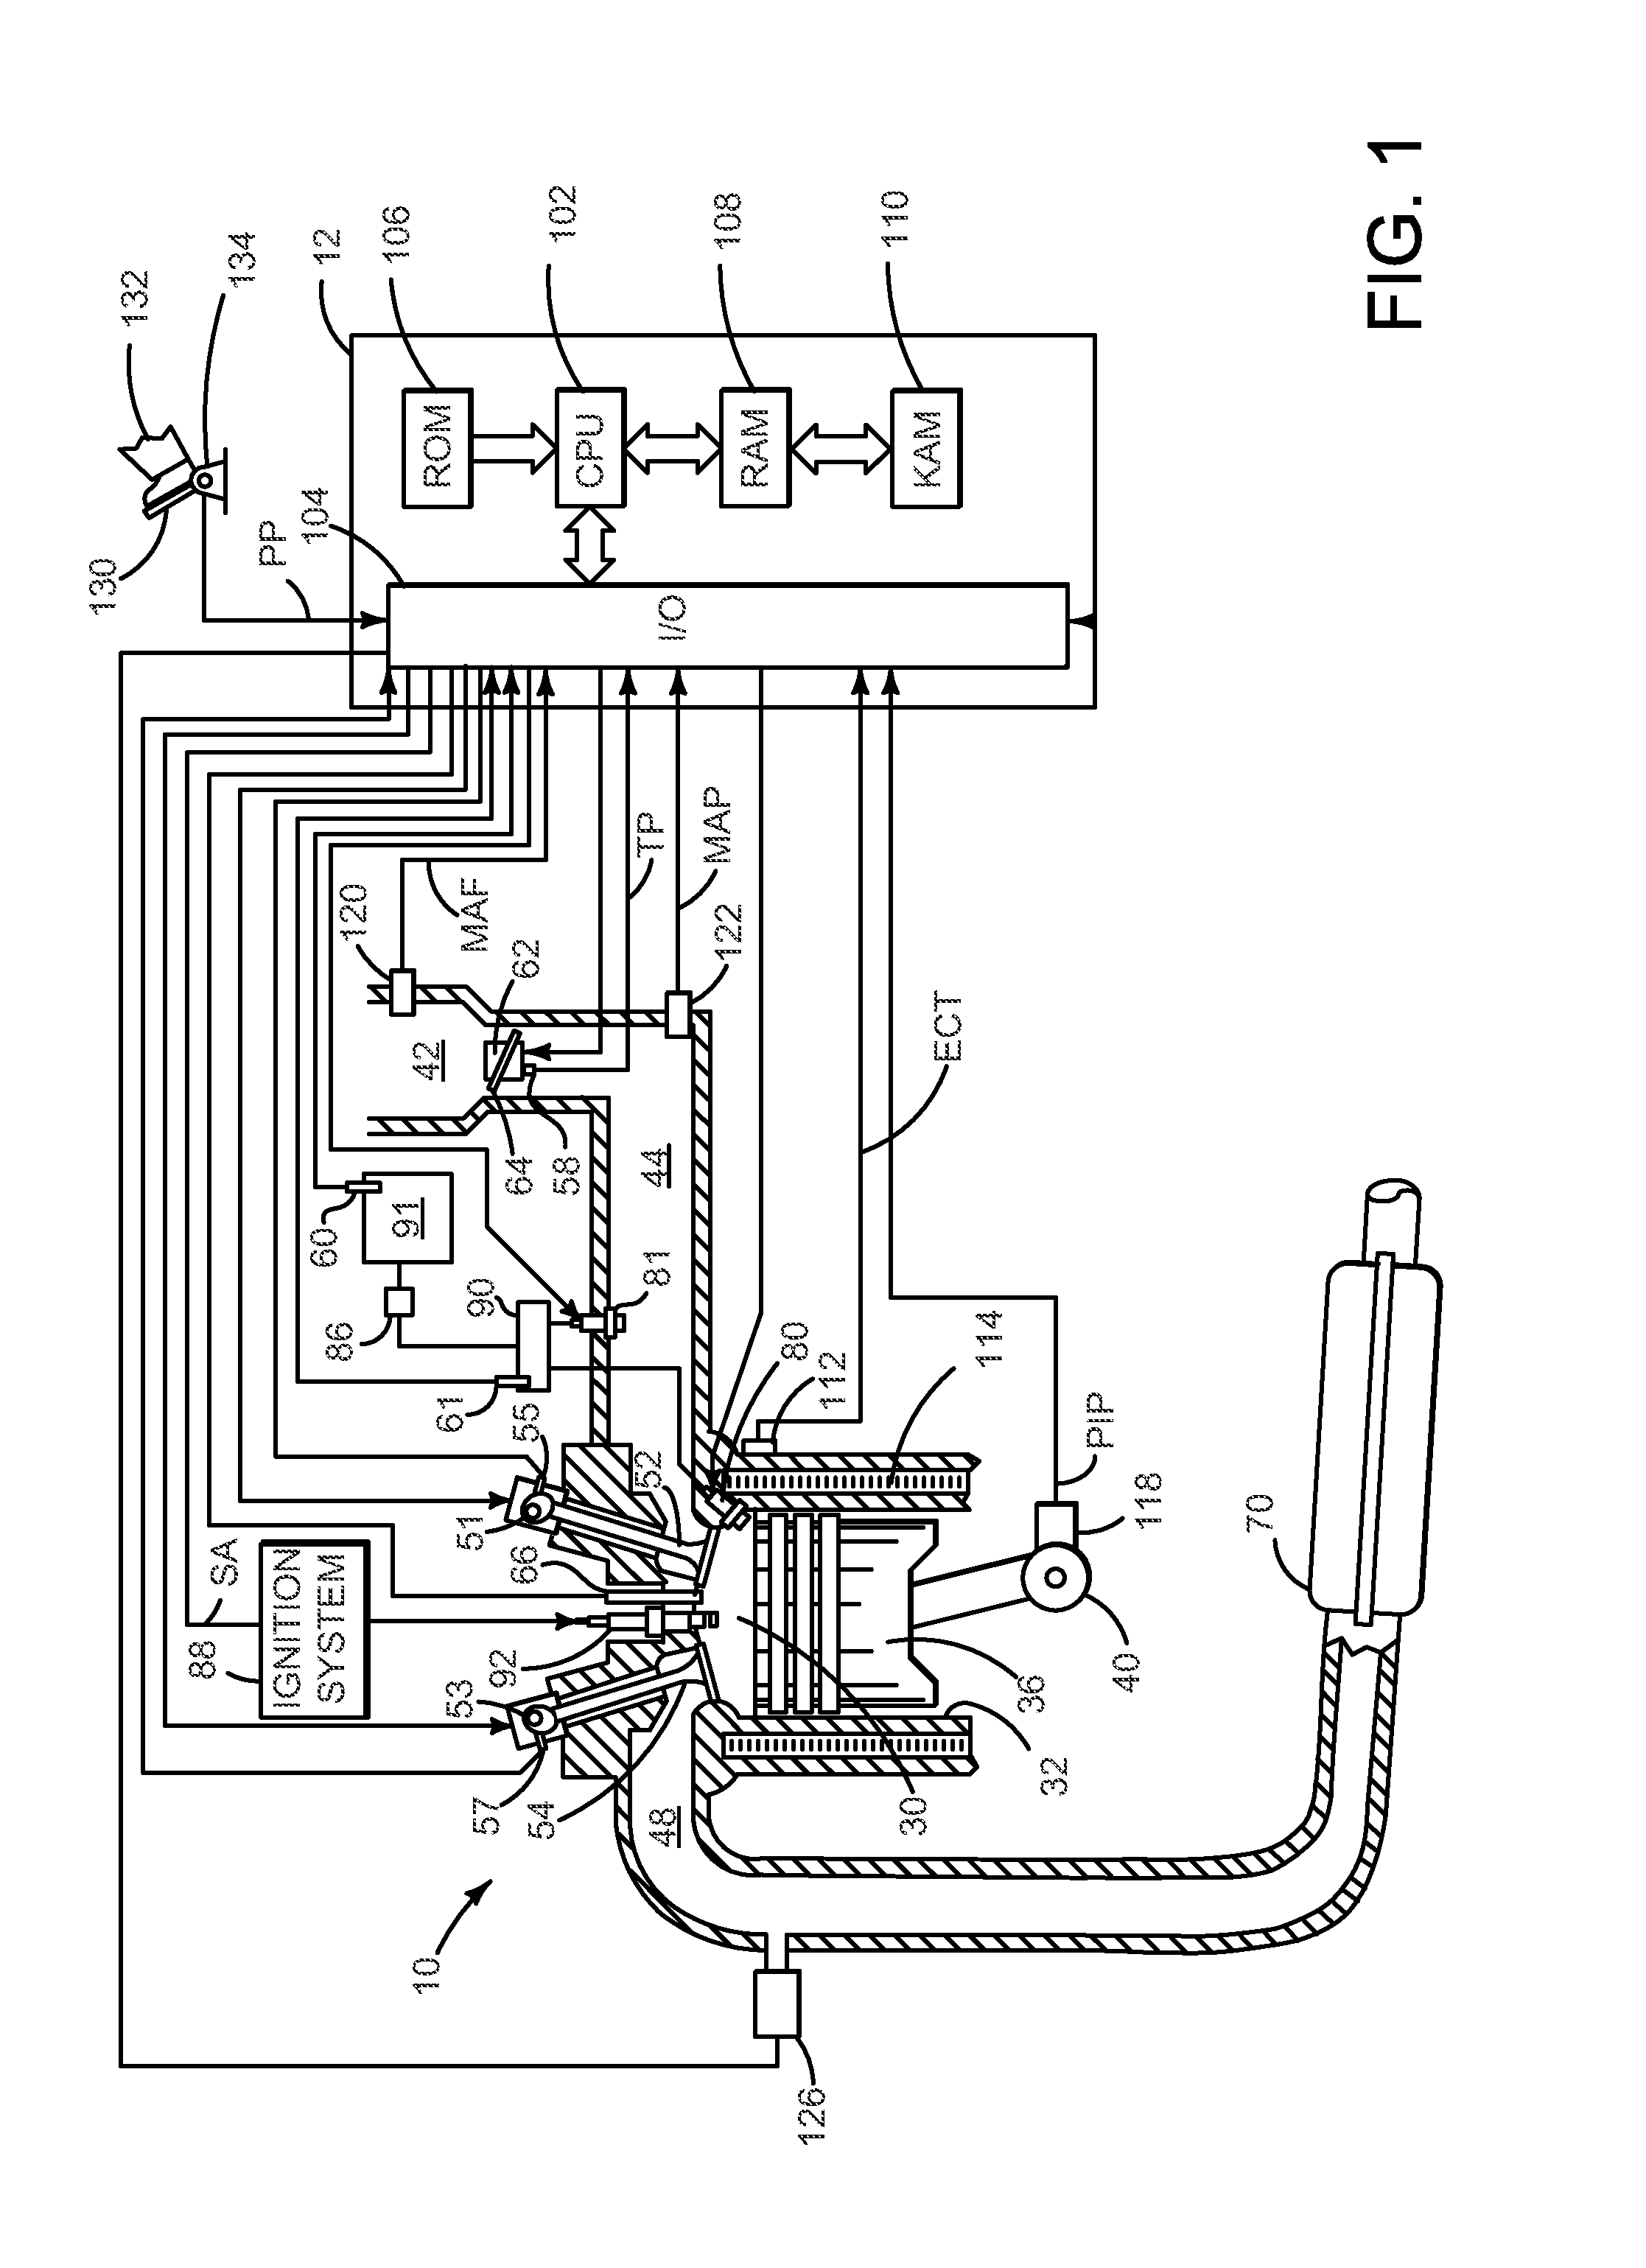 System and method for emptying a tank